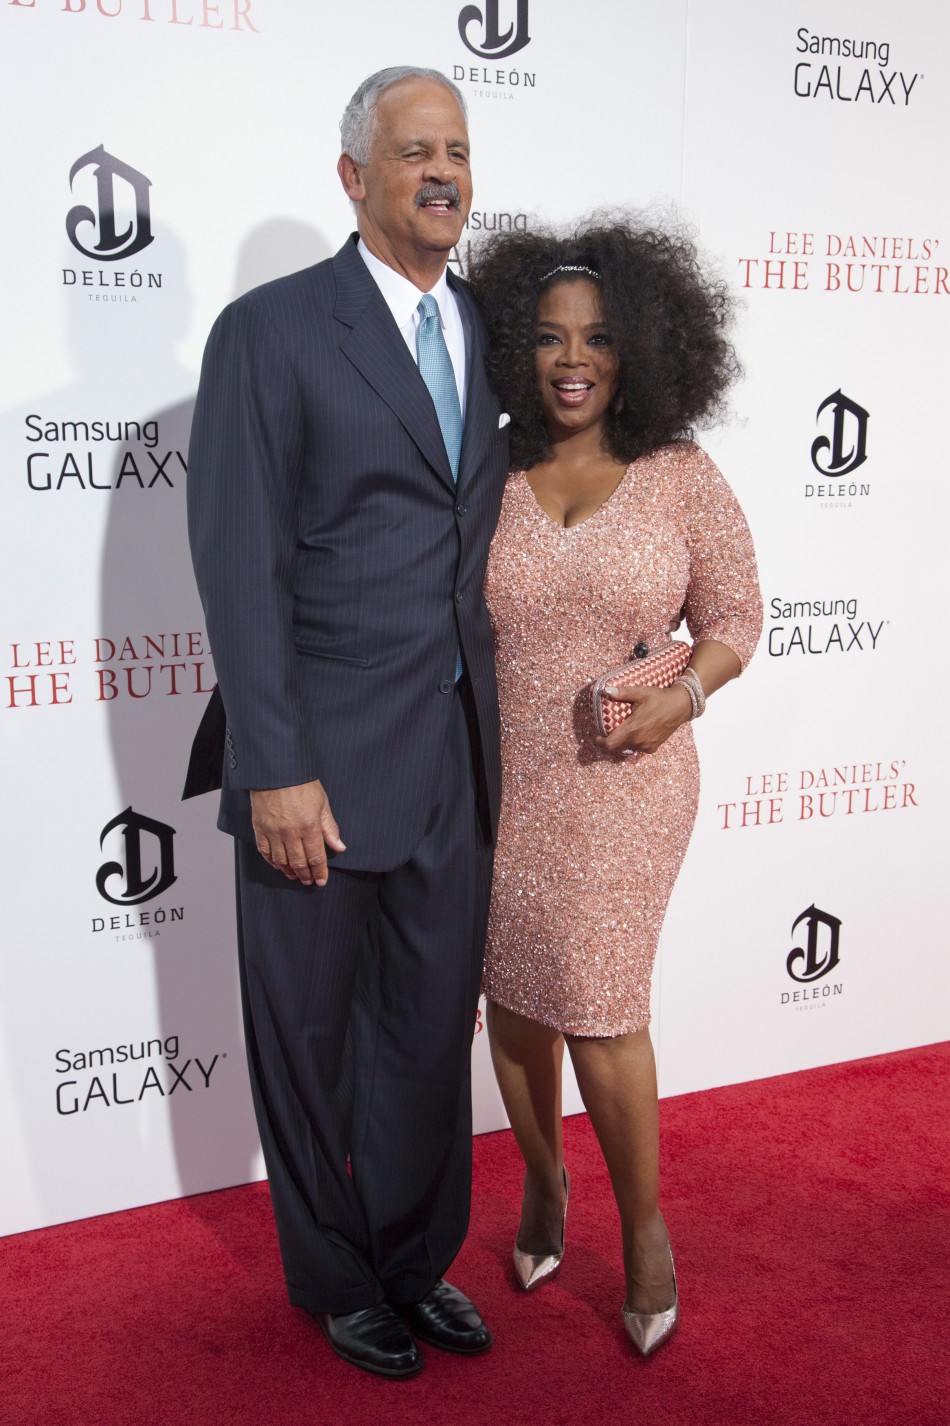 The Butler Premiere